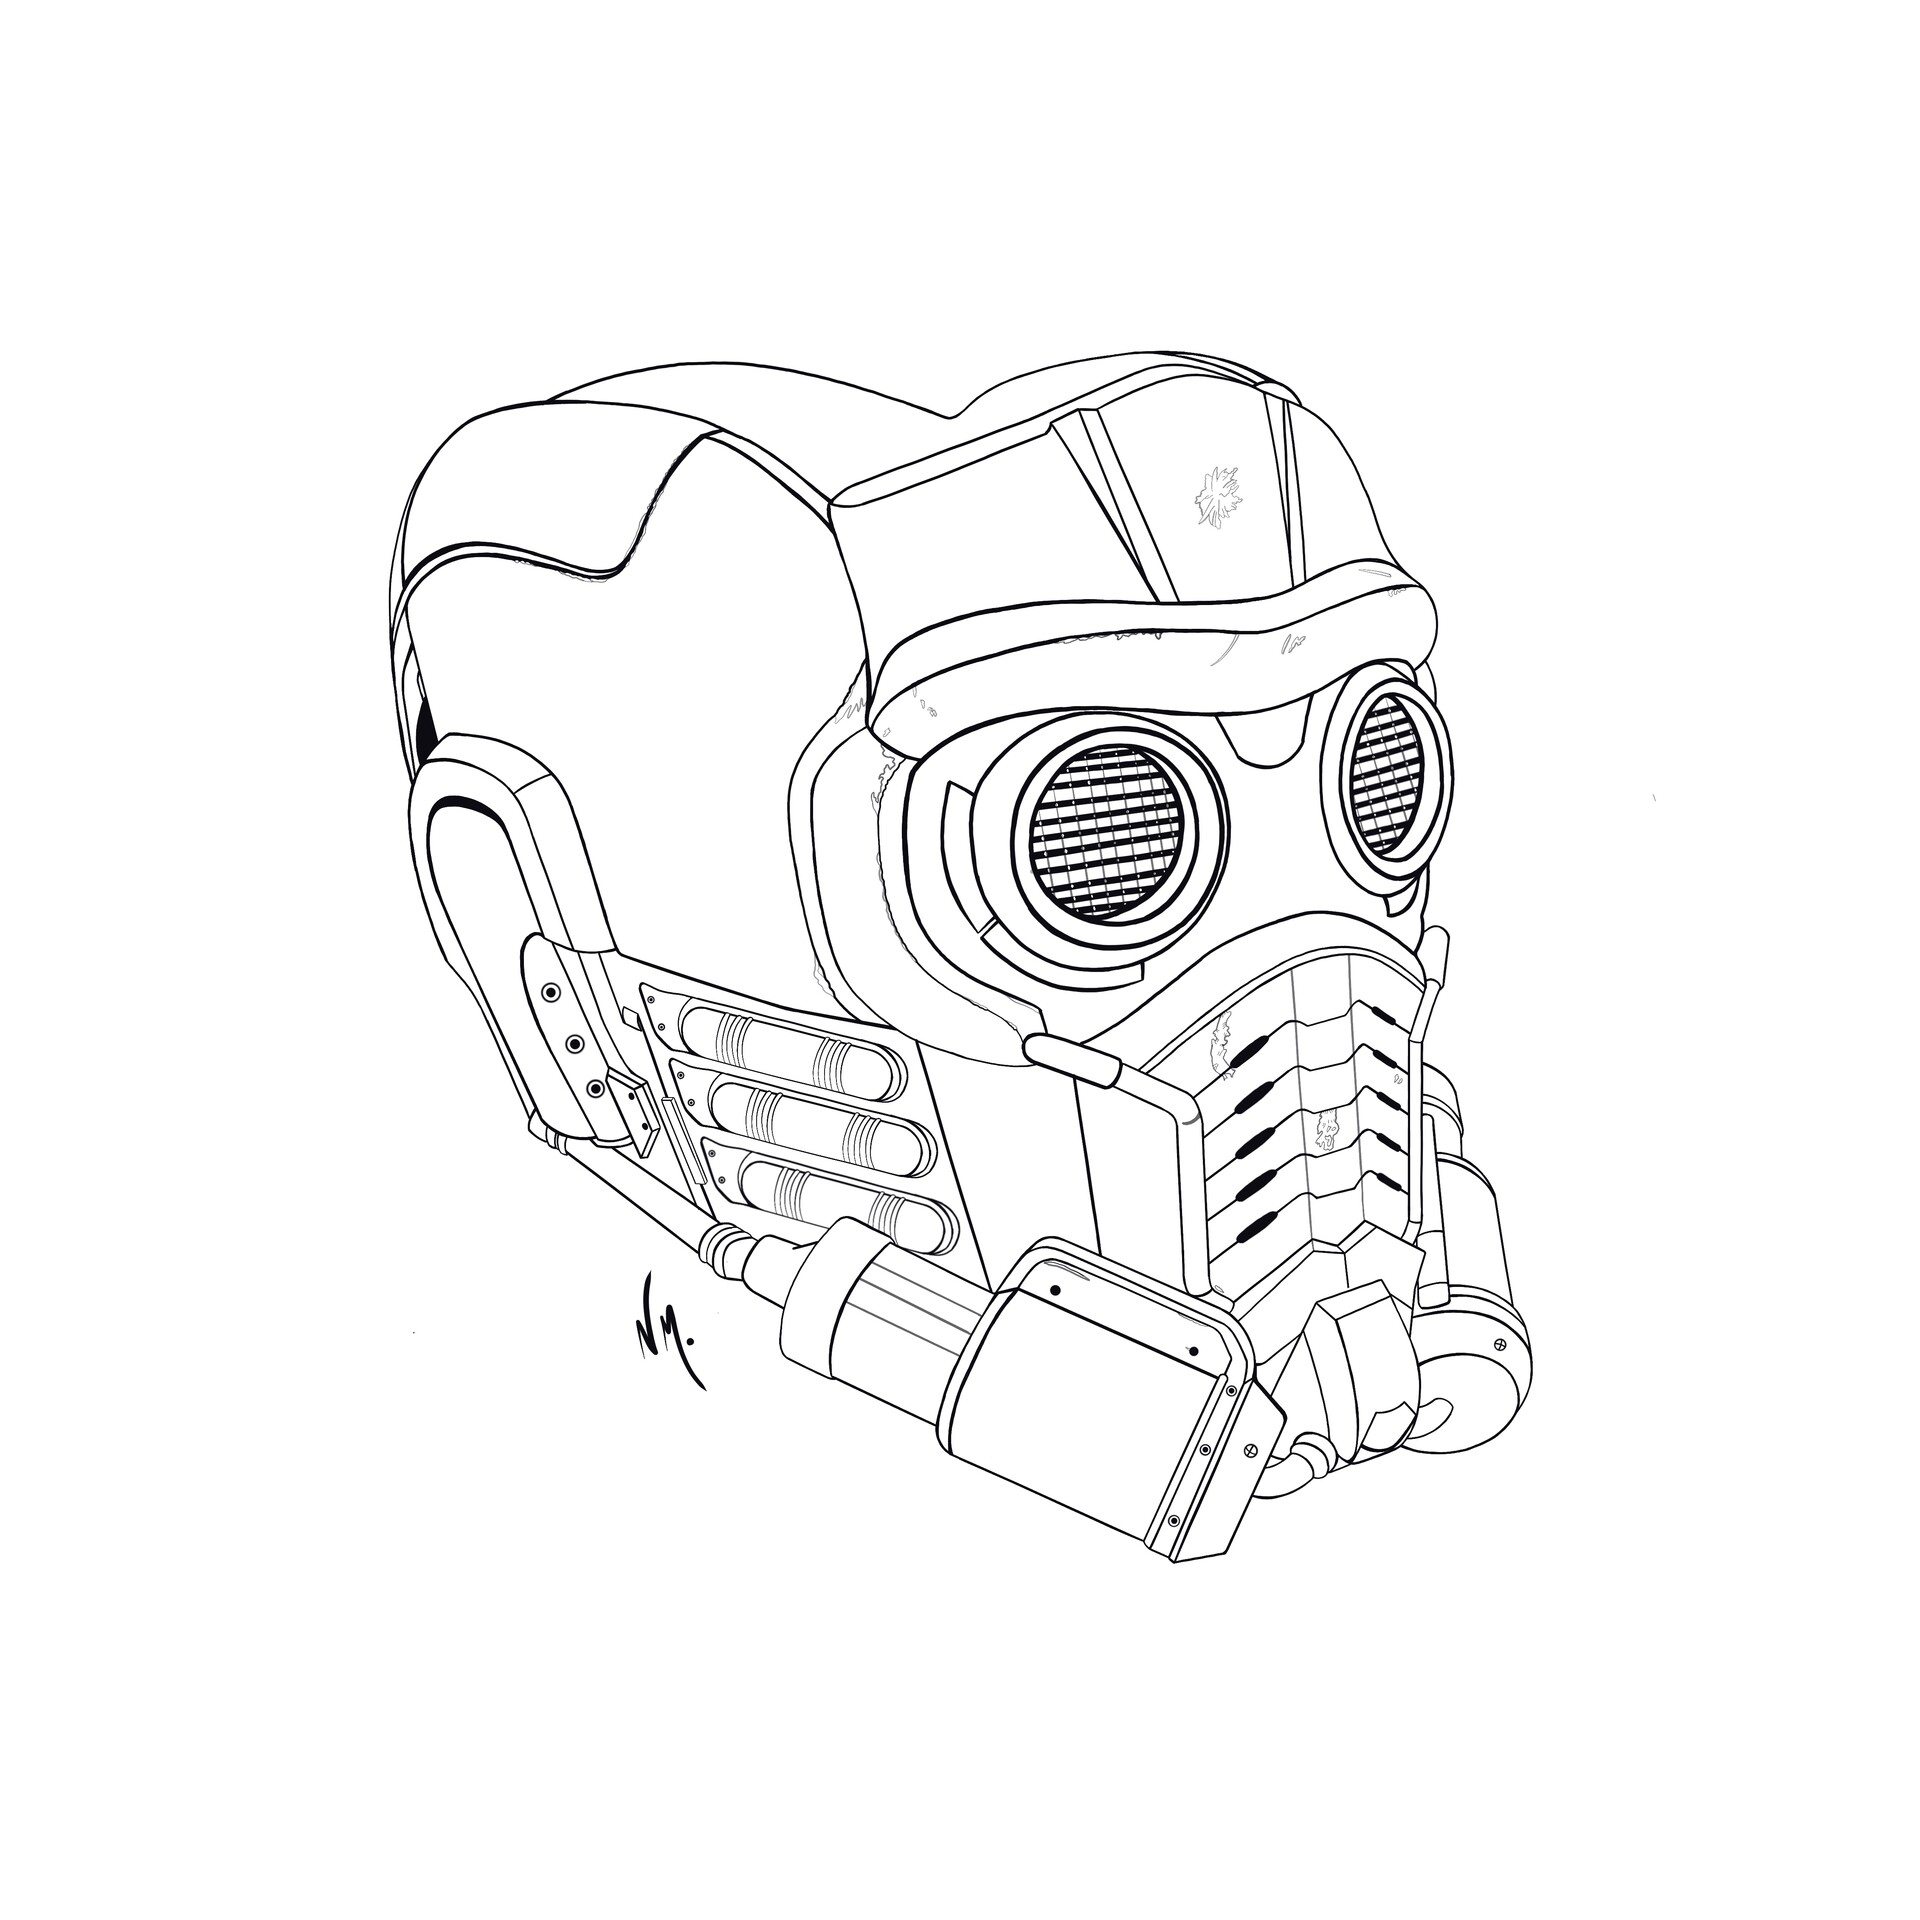 Star Lord Tattoo Design Images Star Lord Ink Design Ideas  Tattoos  Galaxy tattoo Marvel tattoos